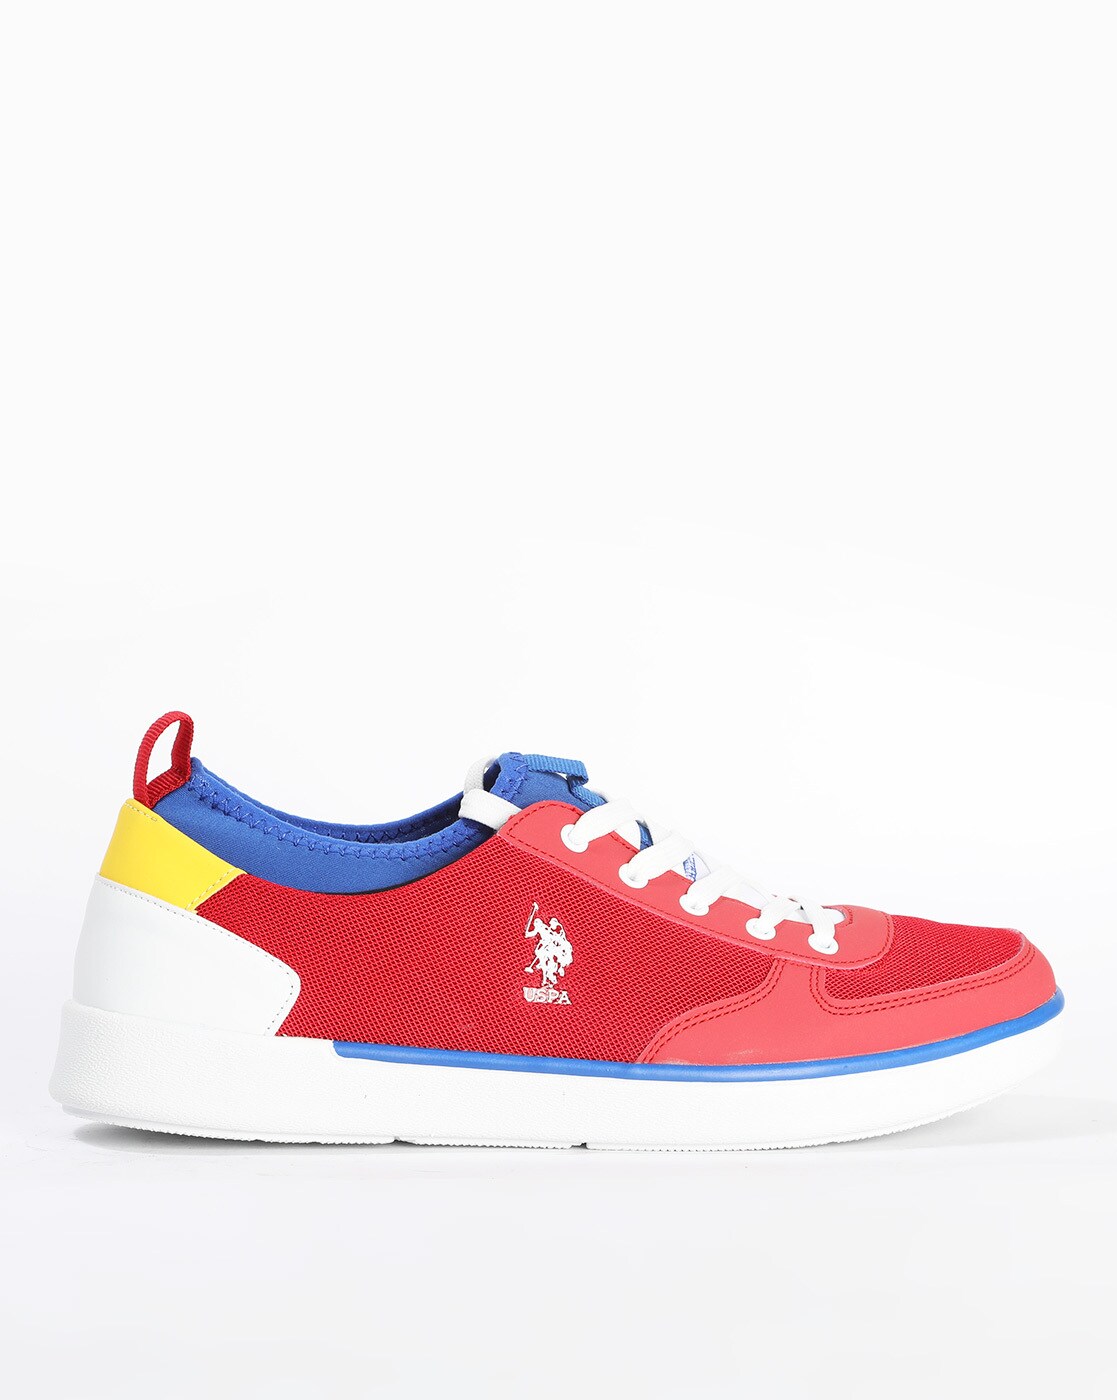 red polo sneakers